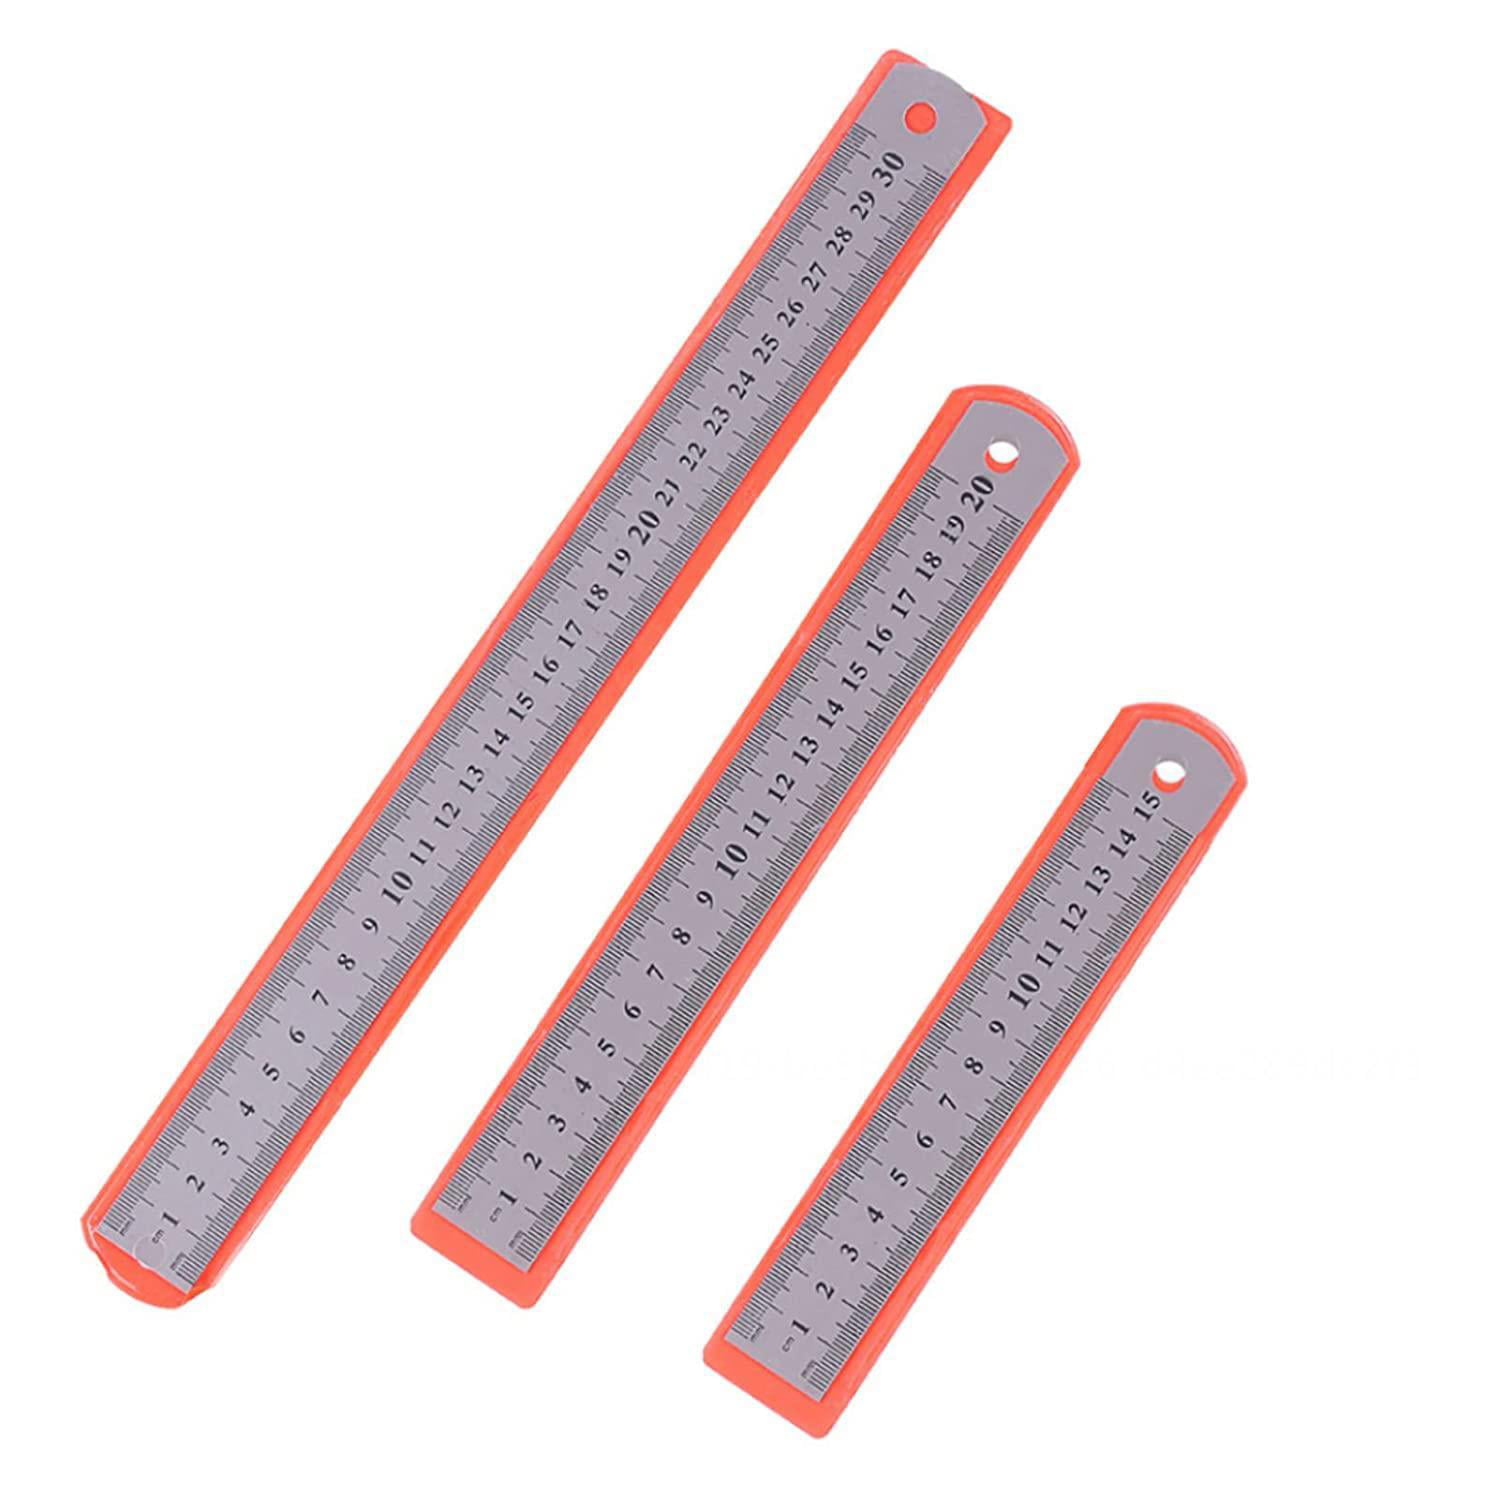 1PC Metric and Imperial Scale Stainless Steel Ruler Double-sided 2/6/8/12/16/20  Inch Metal Rulers with High Precision Graduation Line